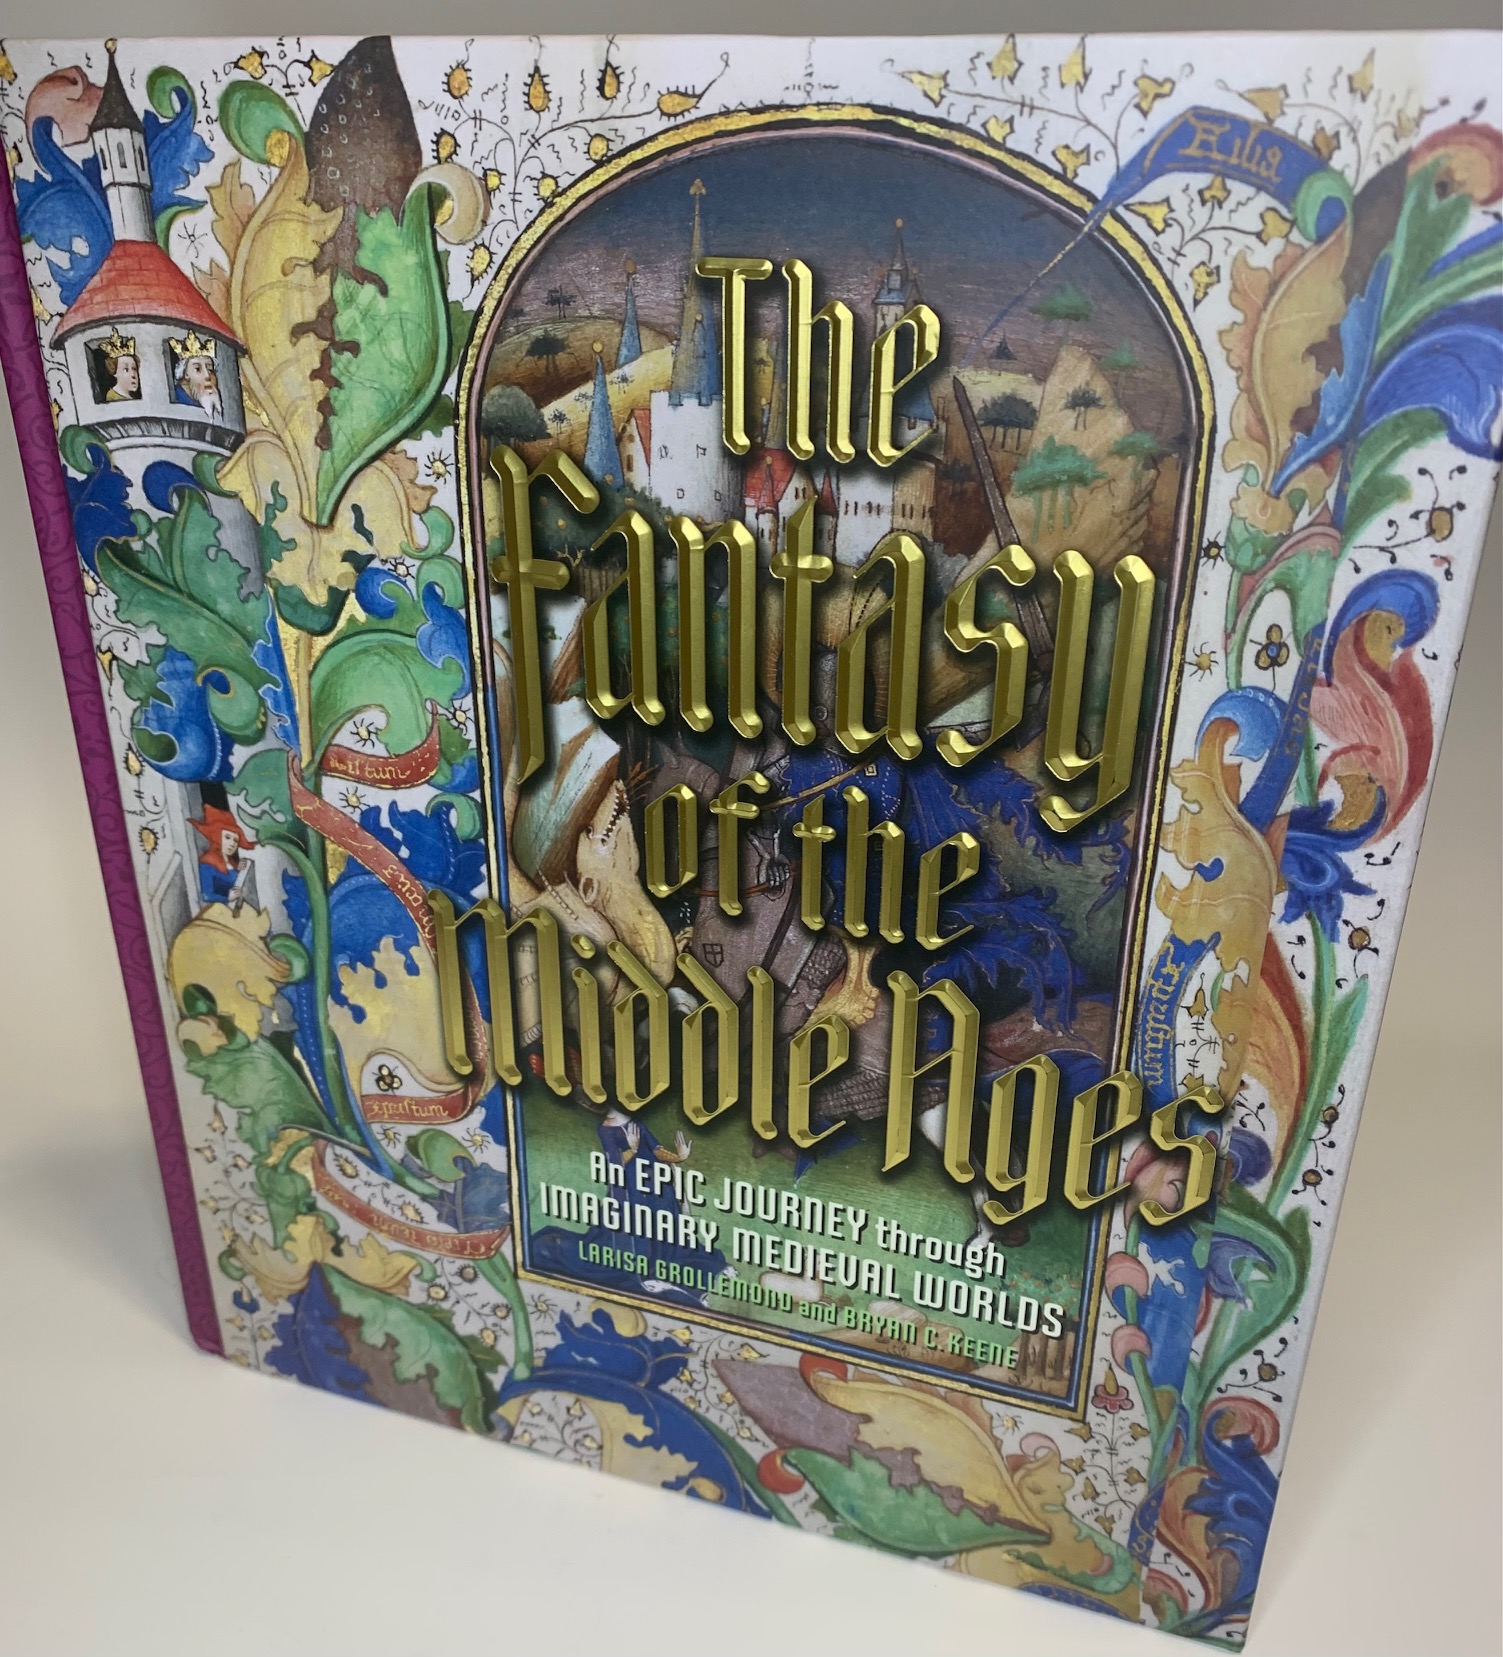 New Medieval Books: The Fantasy of the Middle Ages: An Epic Journey through Imaginary Medieval Worlds